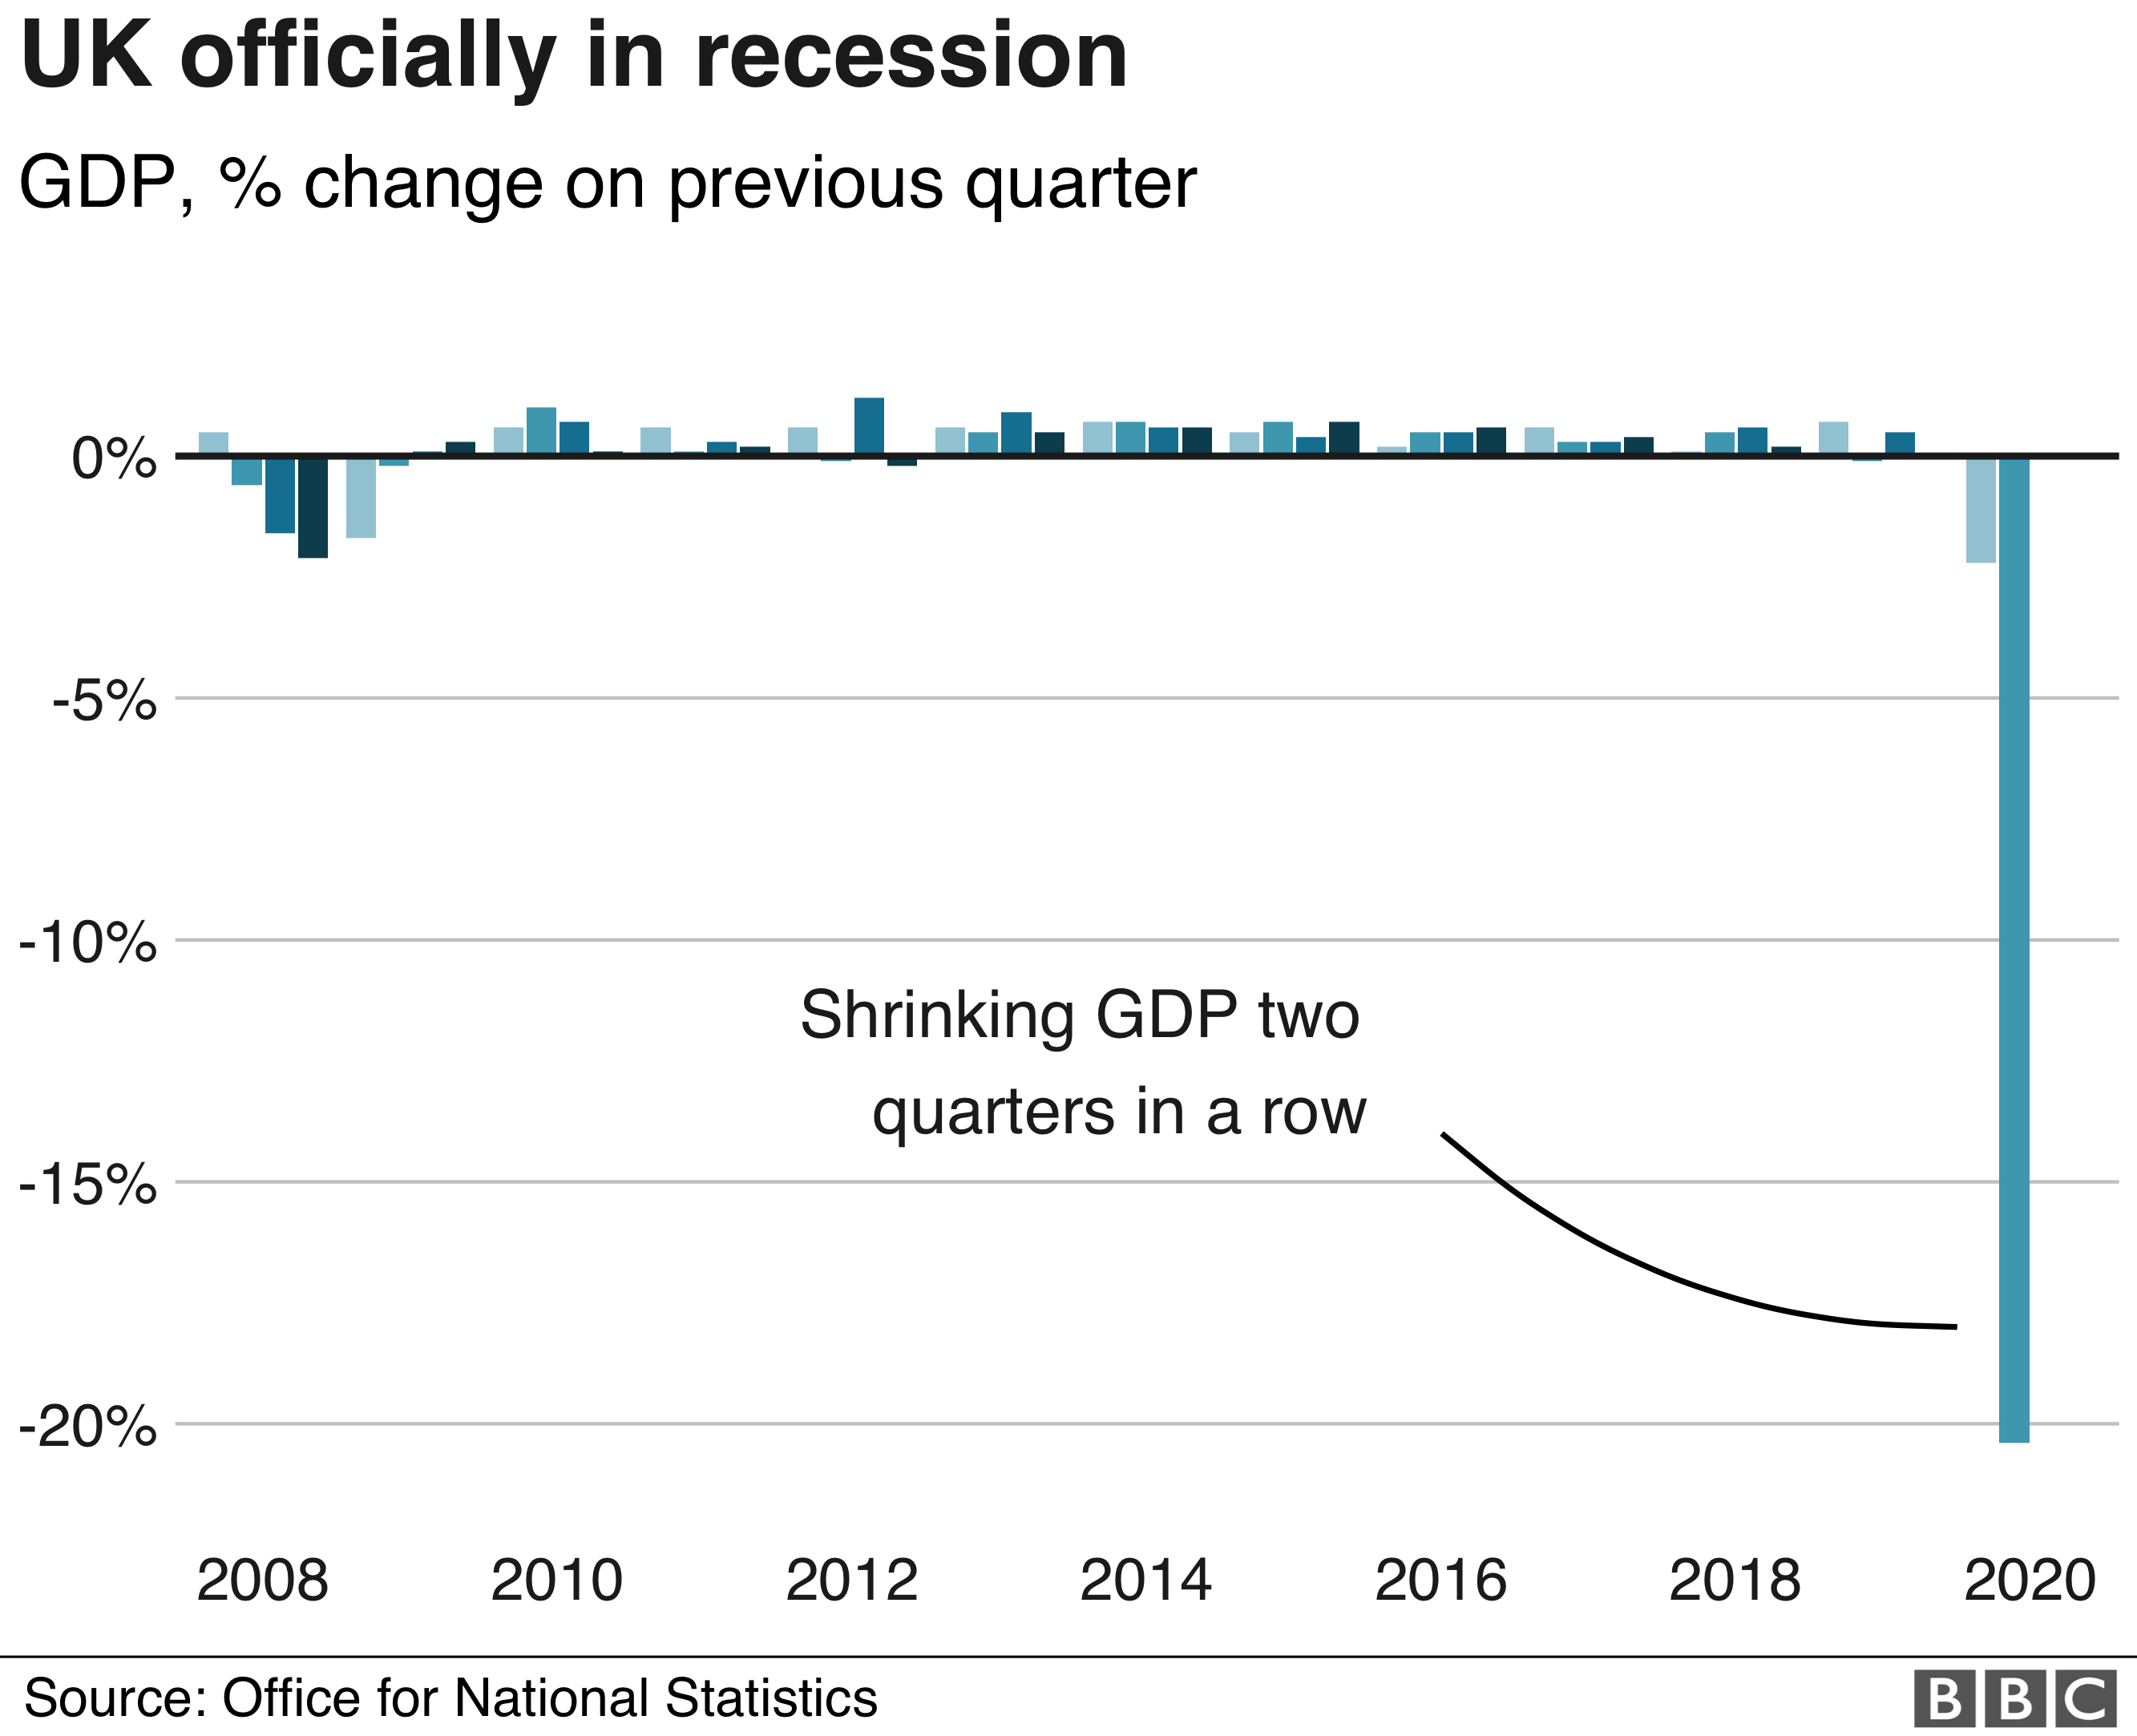 The UK fell into recession for the first time since 2009